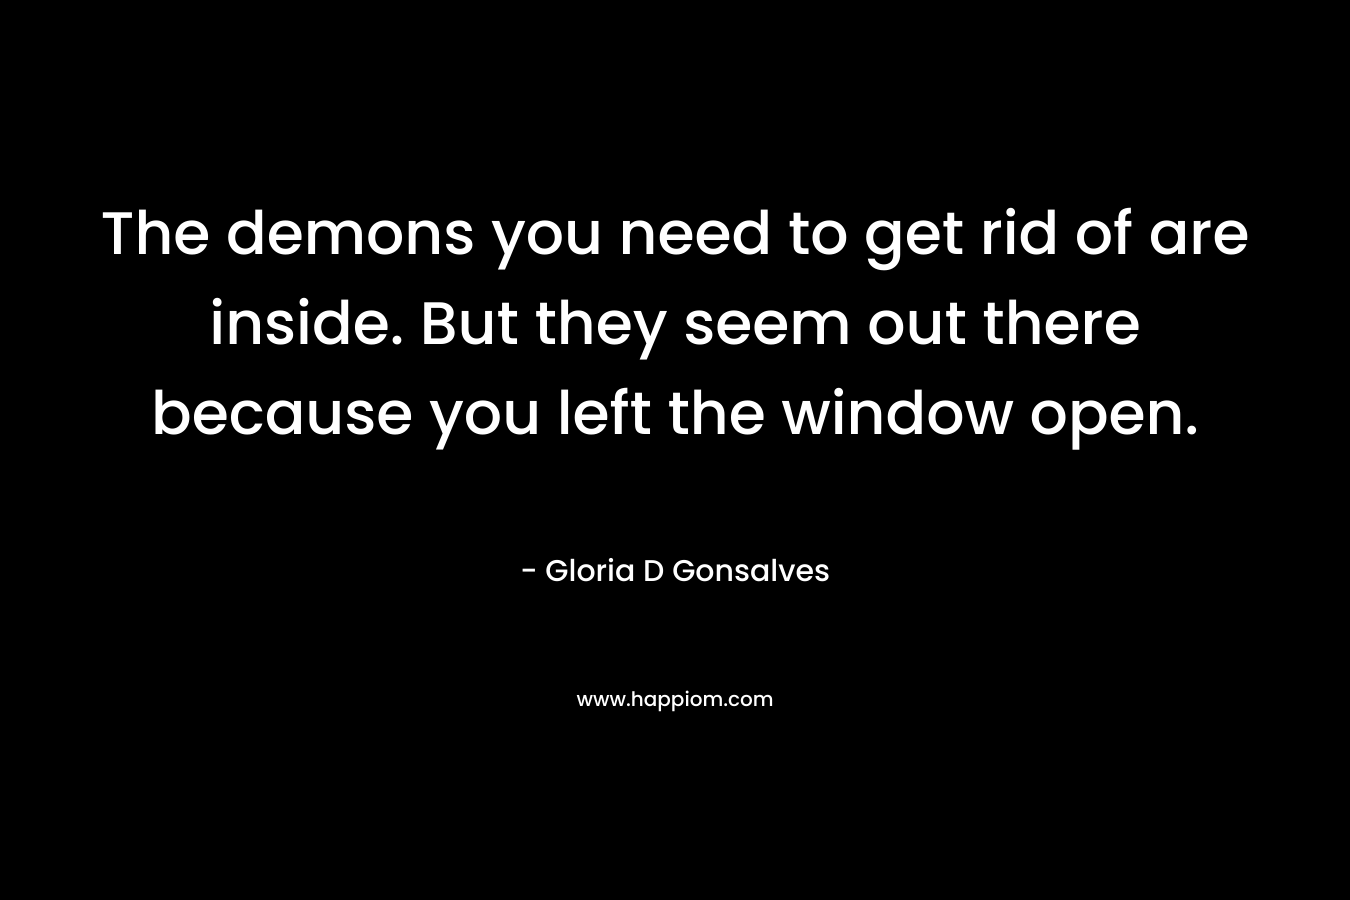 The demons you need to get rid of are inside. But they seem out there because you left the window open.